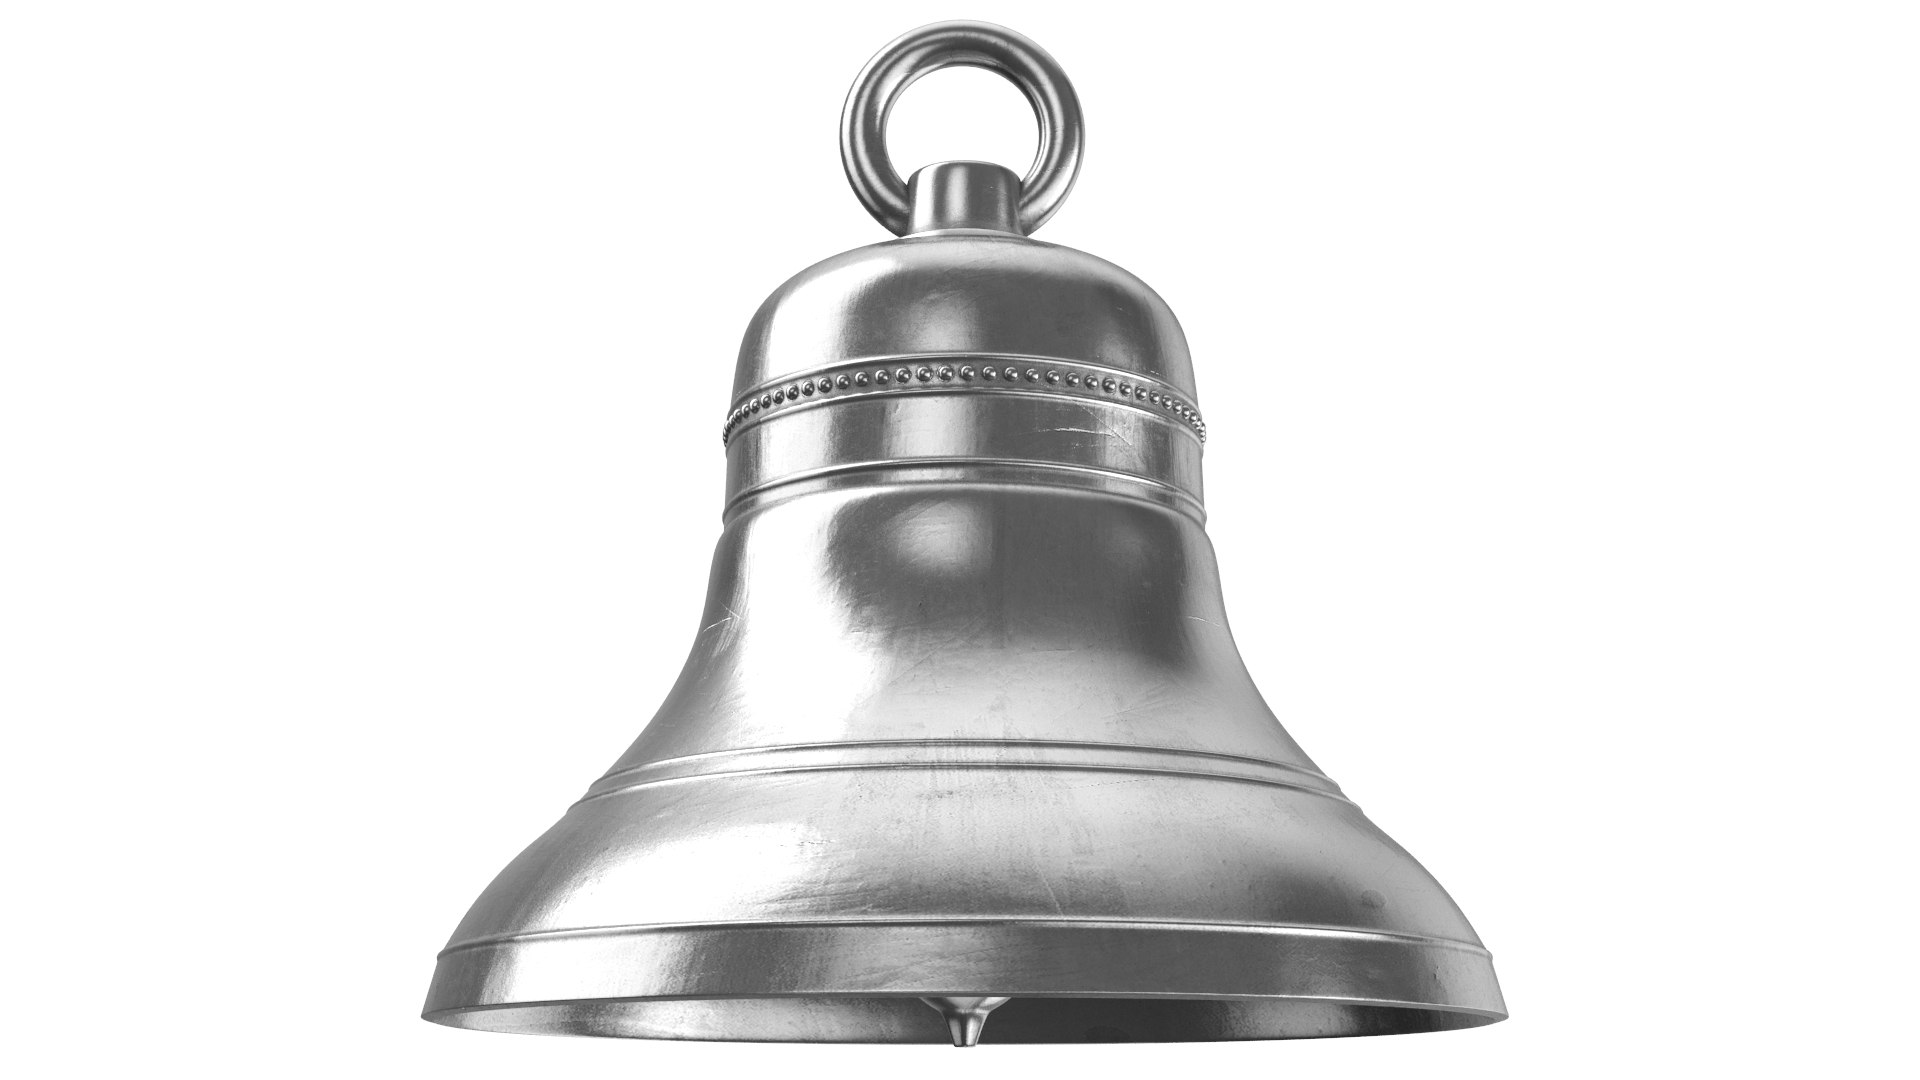 Real silver bell 3D model - TurboSquid 1623430